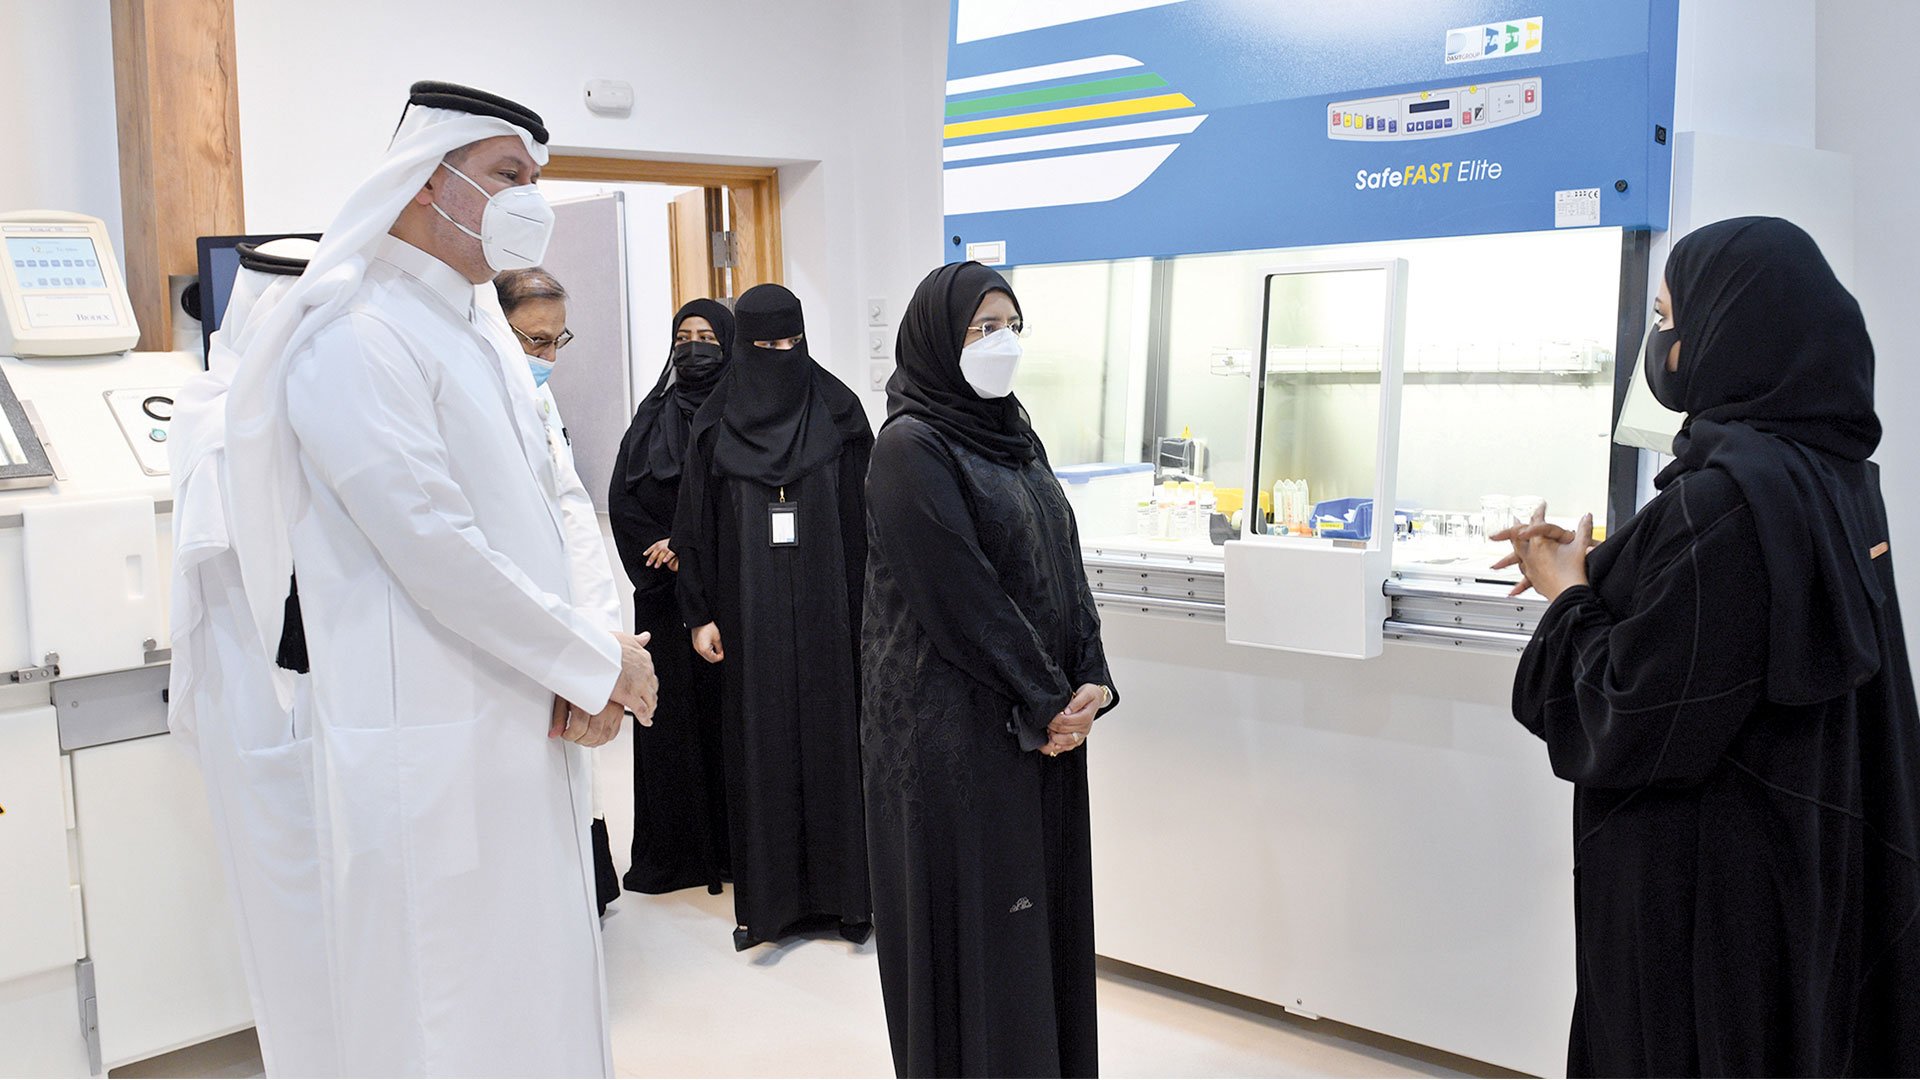 Minister of Public Health Inaugurates New Nuclear Medicine Department at HMC